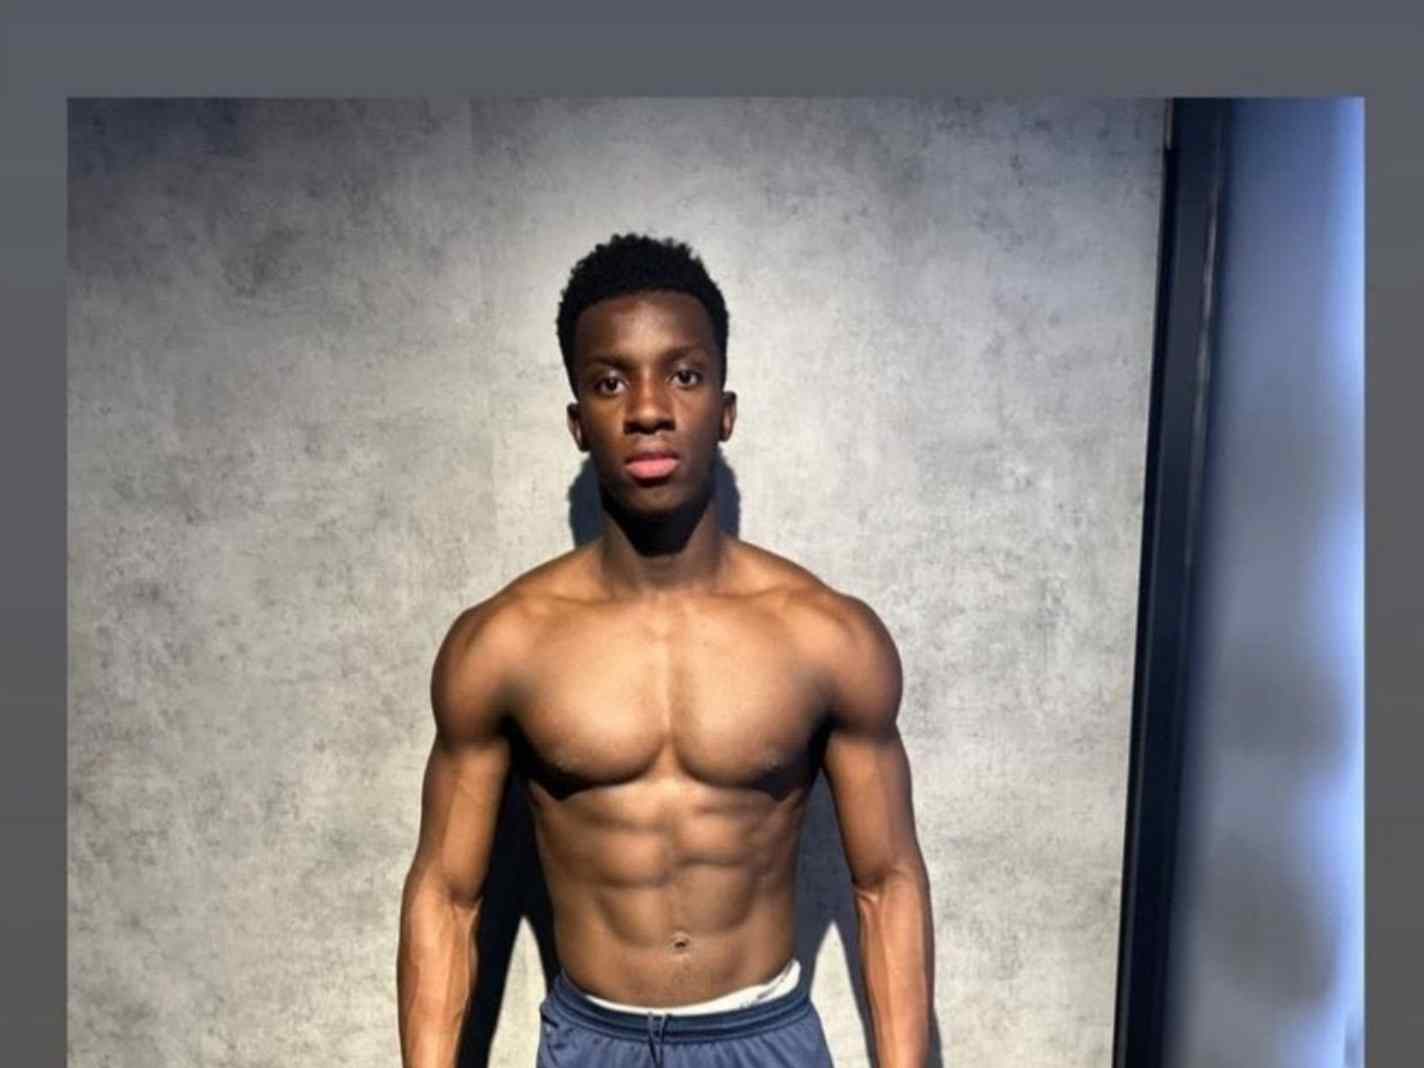 The photo shows Eddie Nketiah showing off his ripped physique in new gym photo.